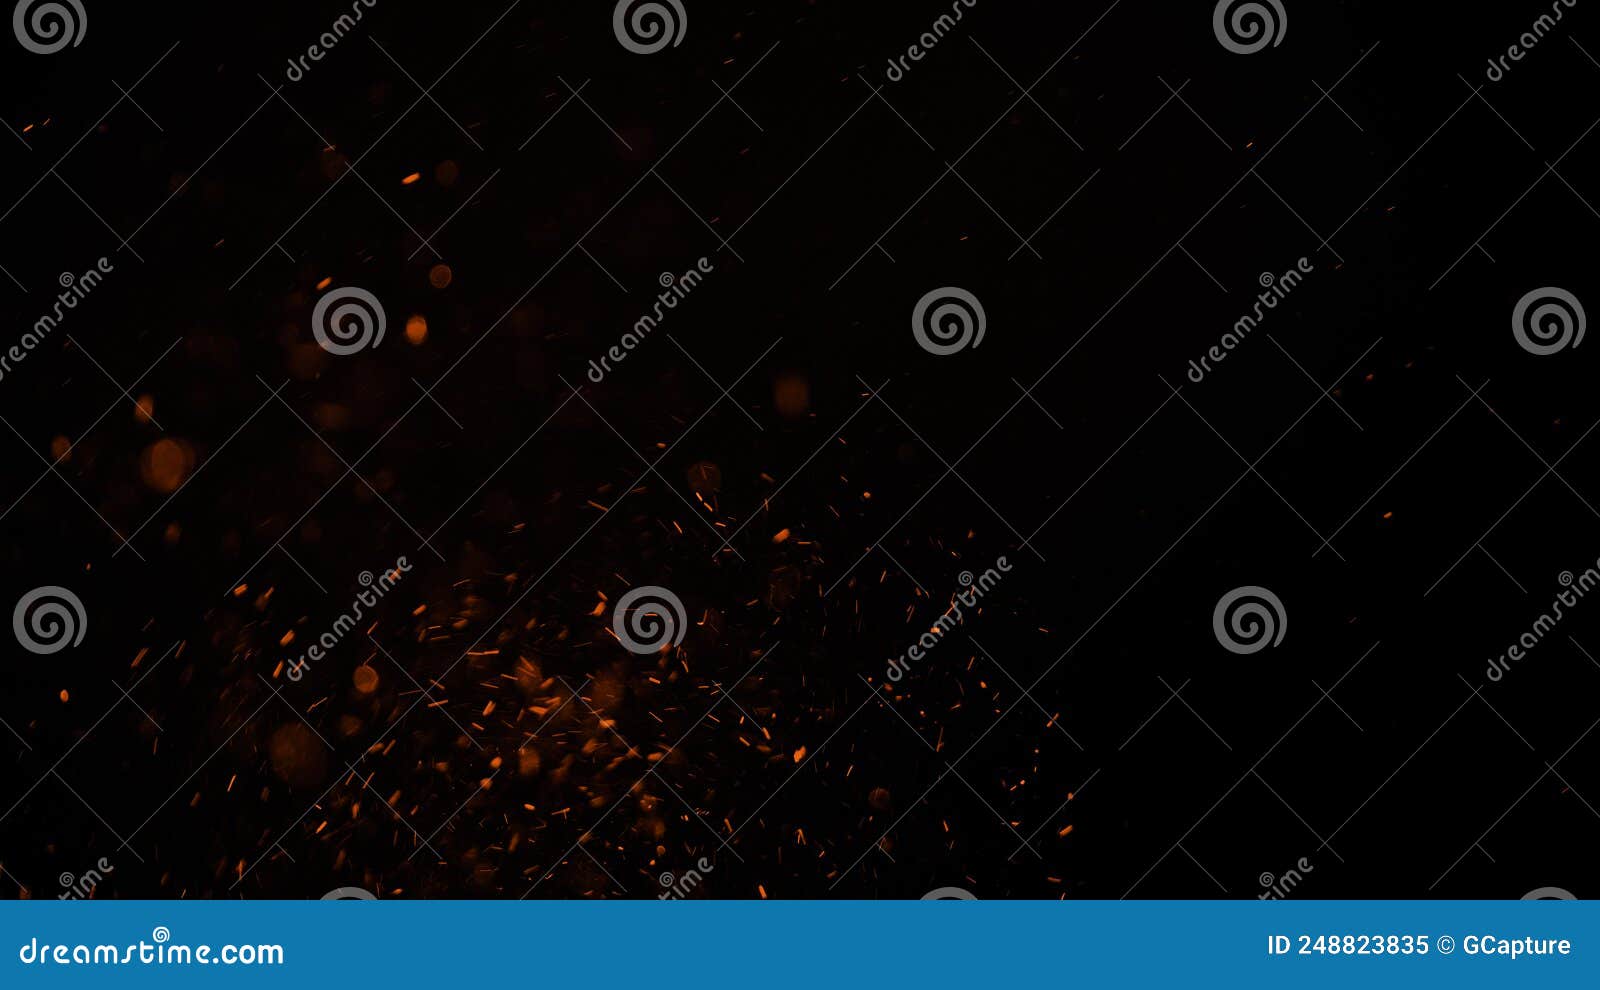 sparks like particles floating in air over black background